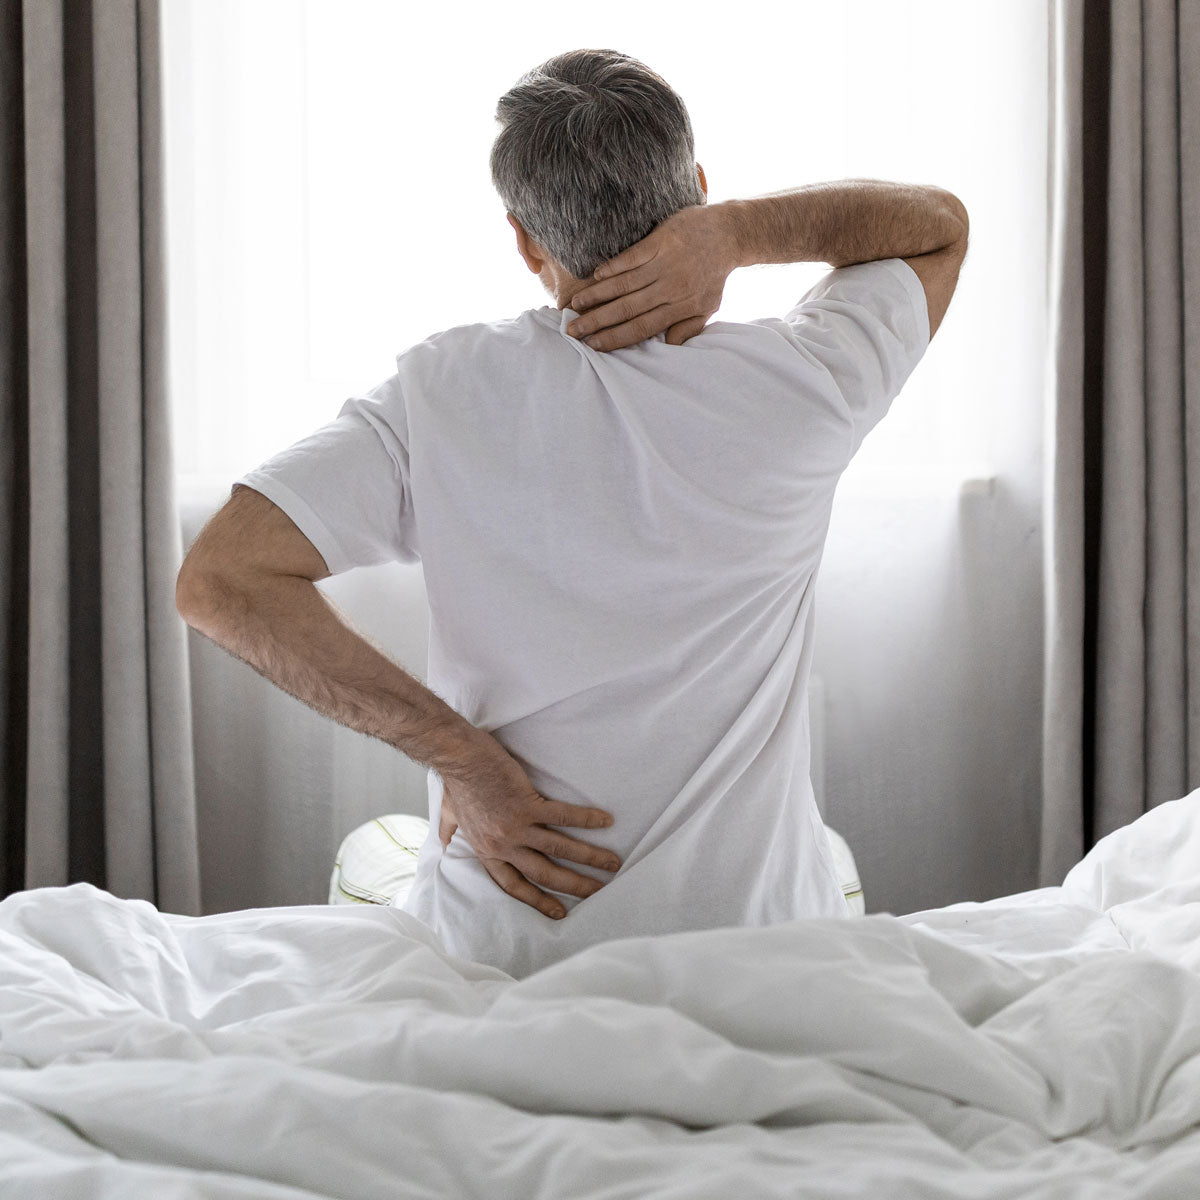 A man getting out of bed with back pain